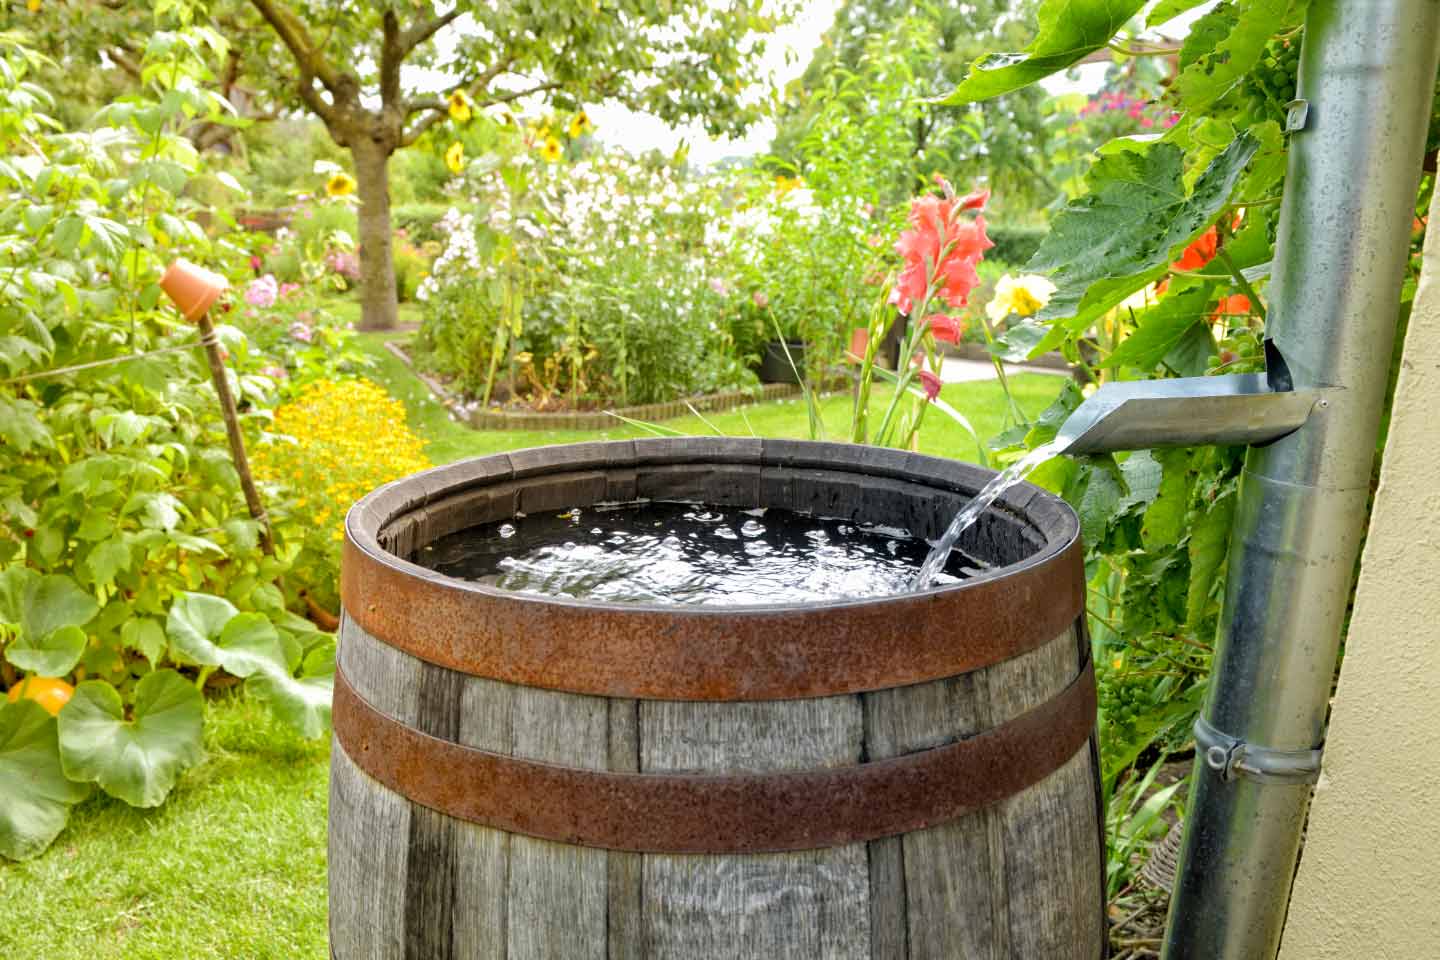 Rain barrel in the garden collecting water from a downspout